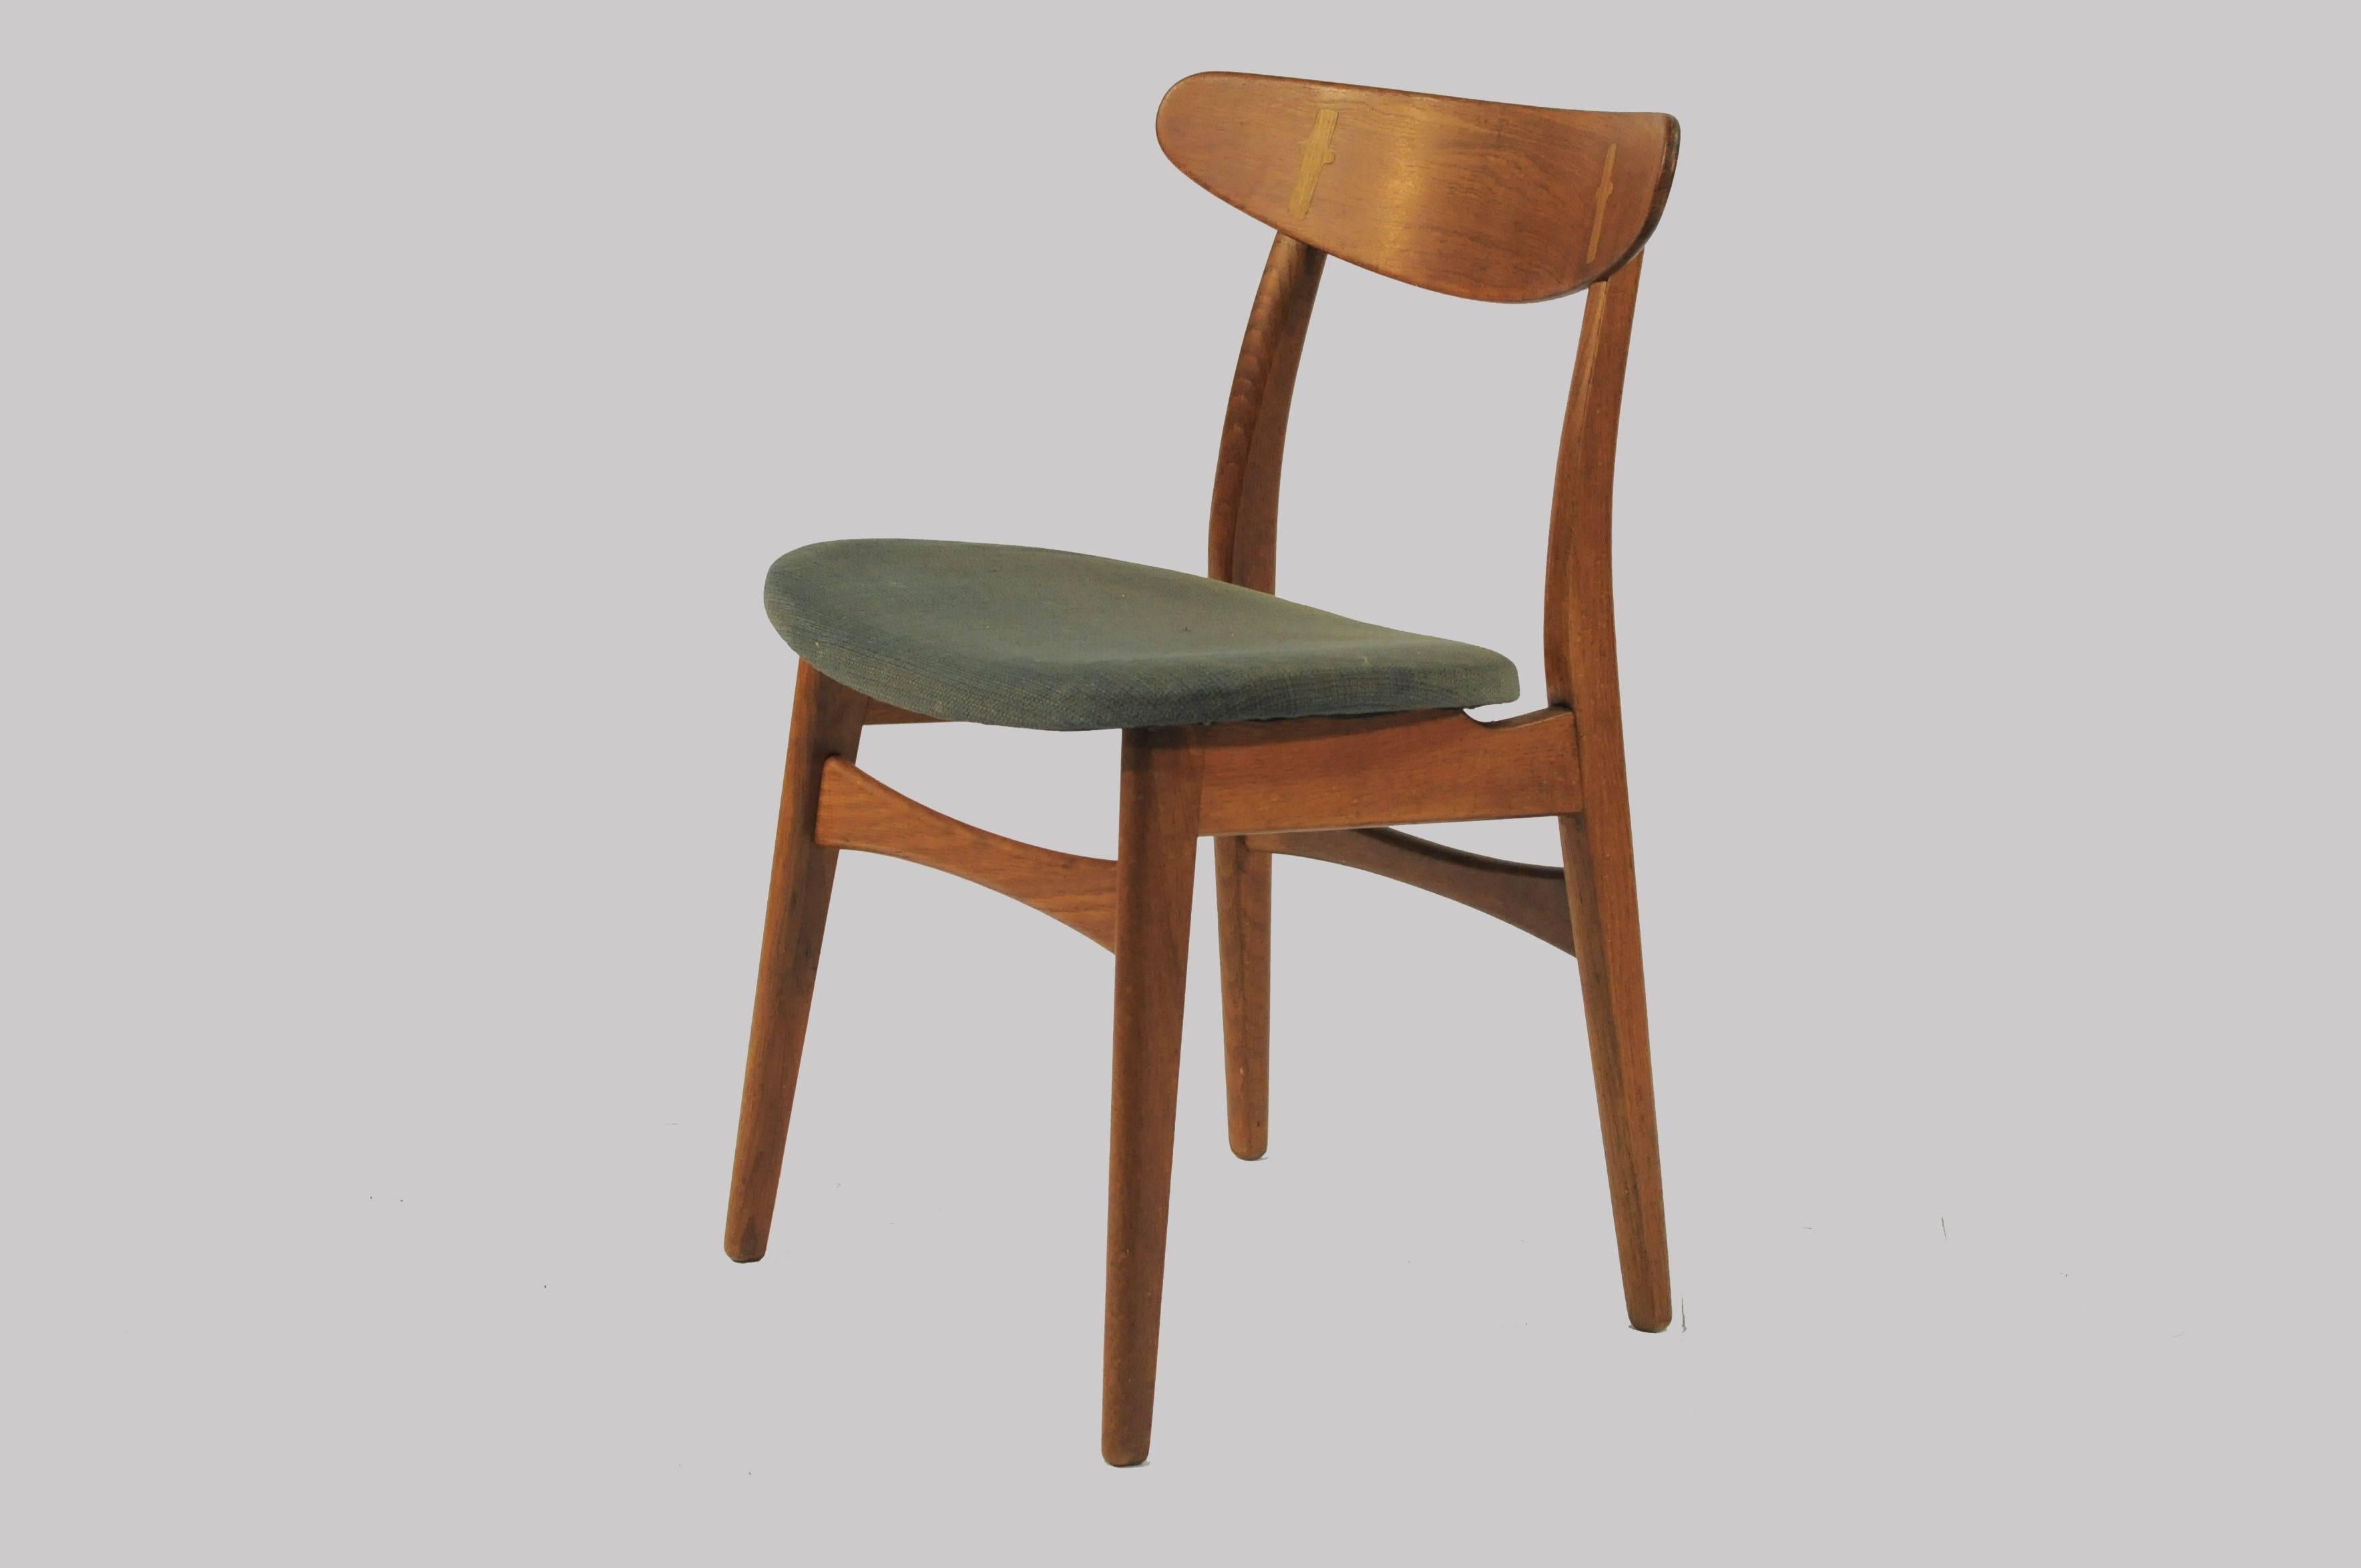 A set of eight Hans Wegner dining chairs designed in 1952 for Carl Hansen & Søn. 

The simple yet sophisticated design has become an iconic Classic among Wegners chairs. The exposed joint between the teak backrest and the oak rear post is a